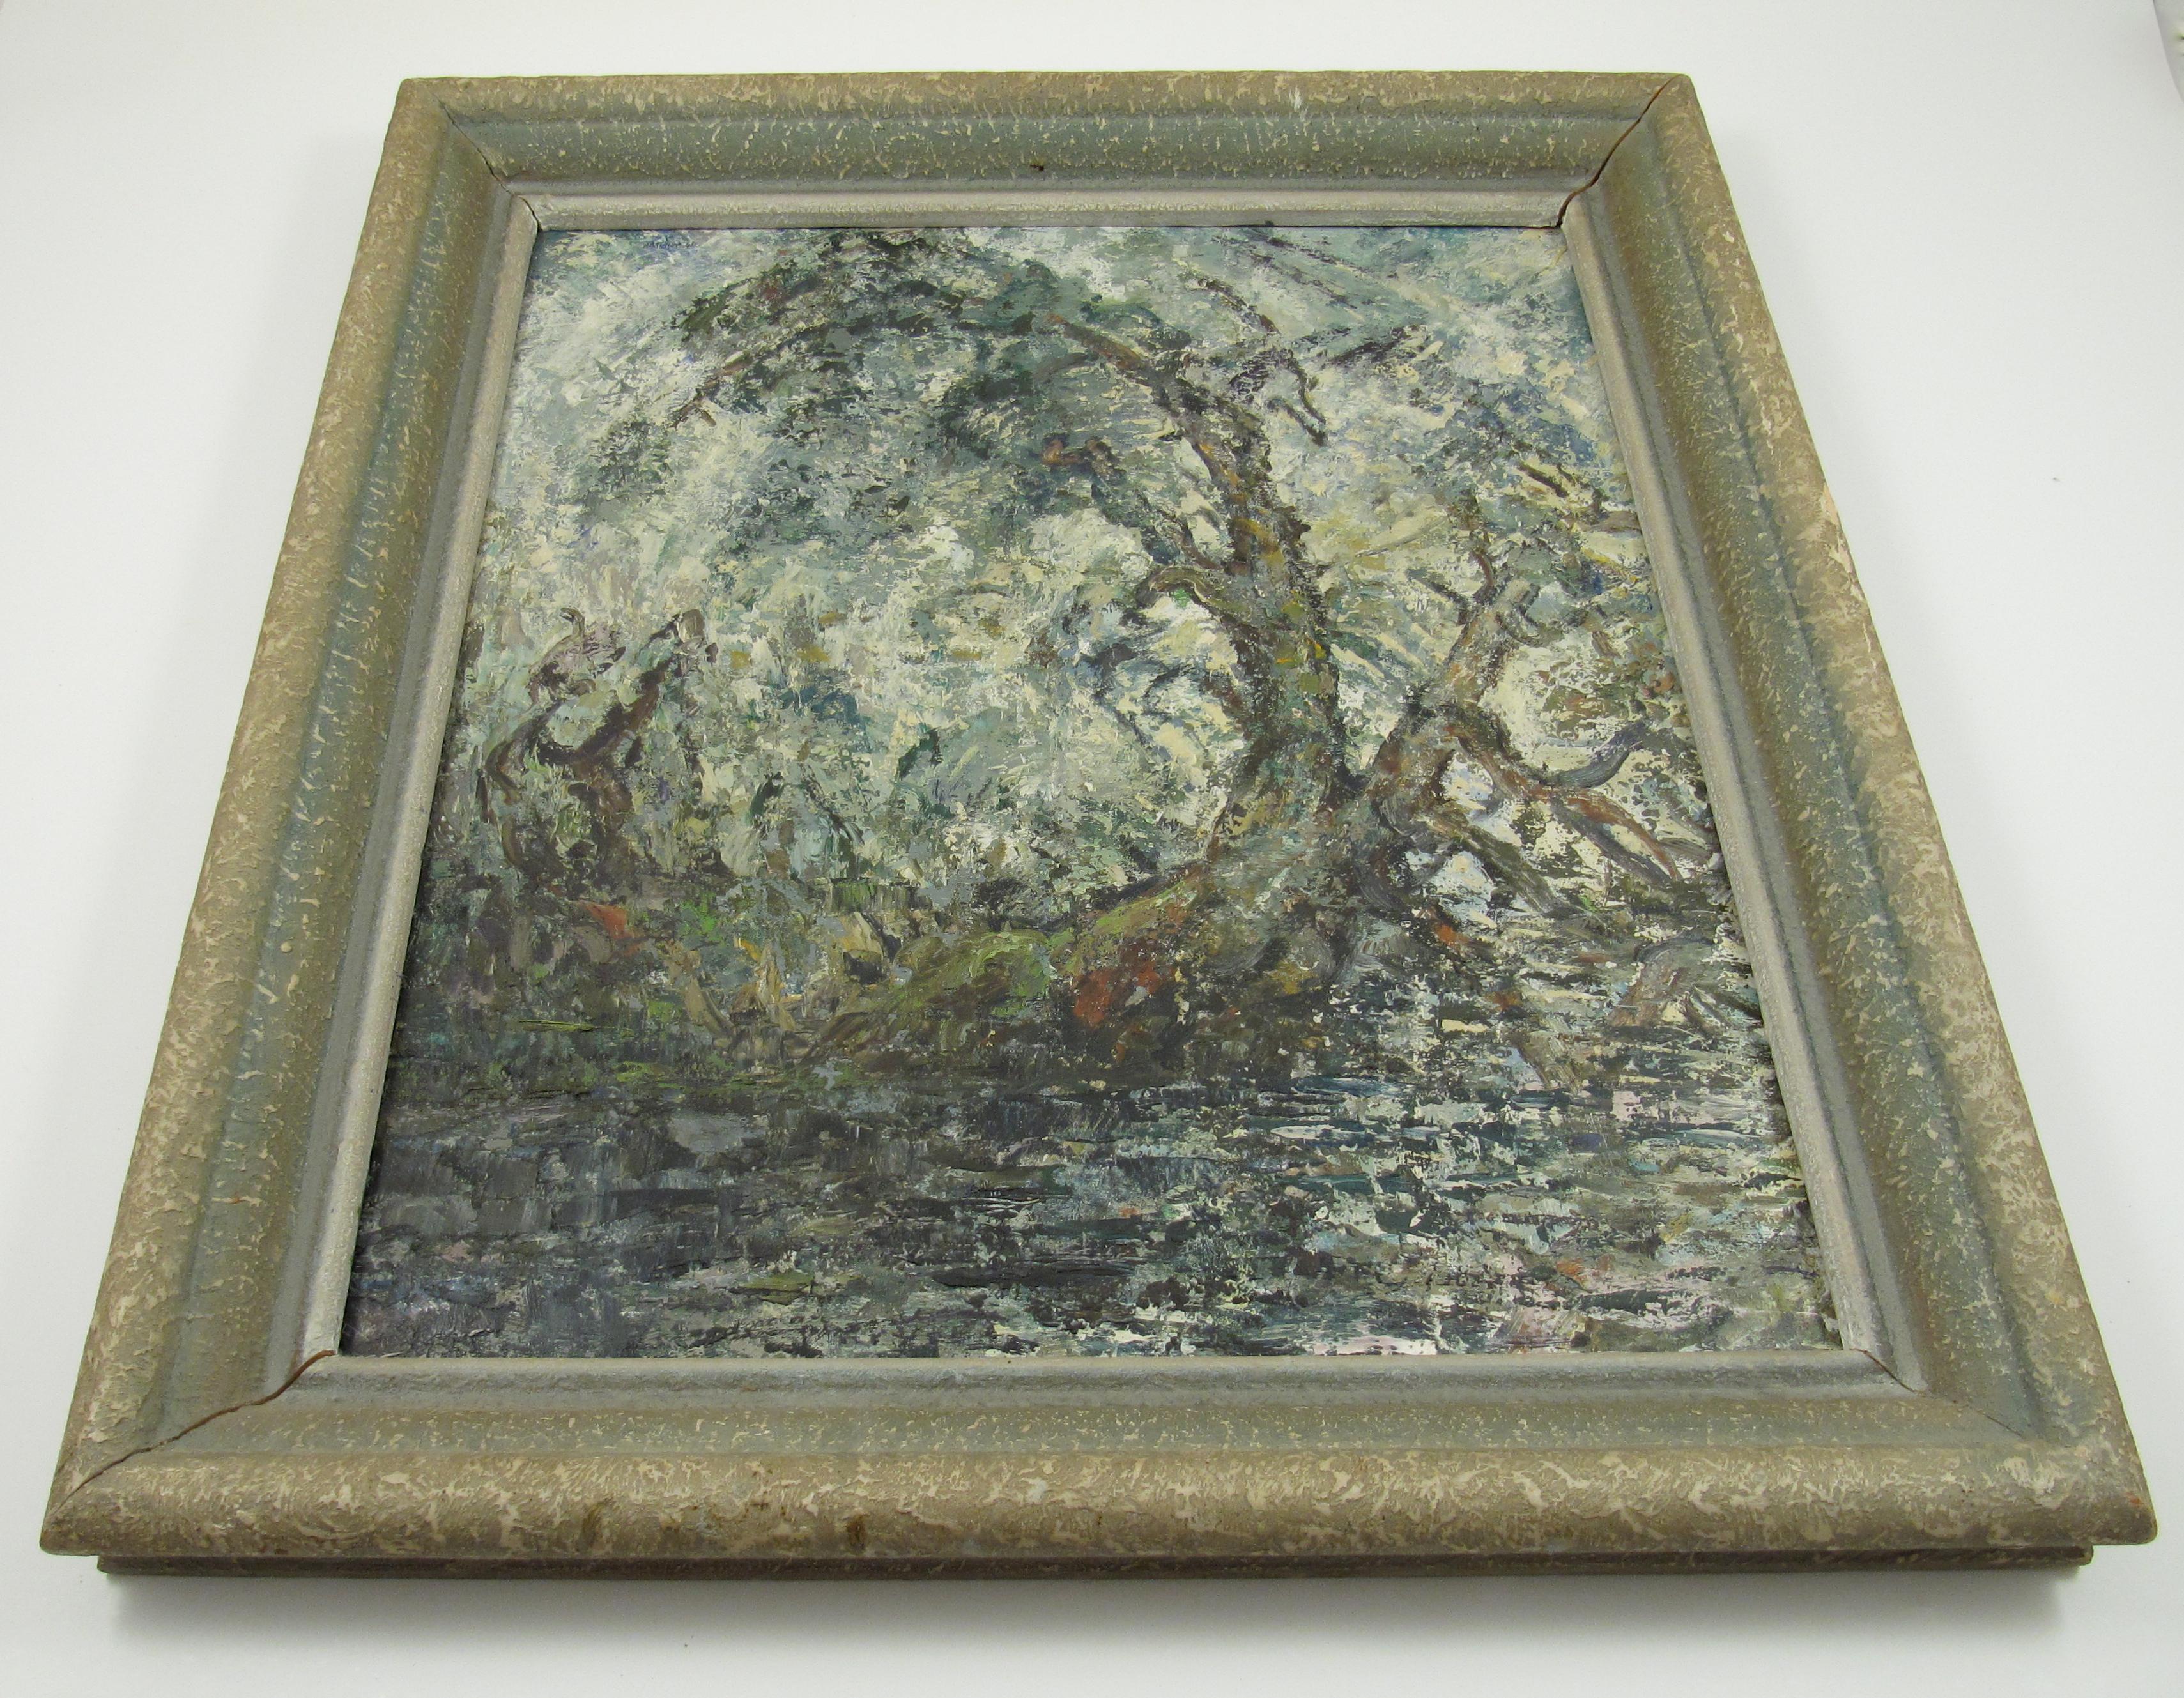 Alphons (Alfons) Müller
(Swiss, * 24.8.1898 Mitlödi, † 8.6.1955 Biel)

Wrath of the Wind

- Oil on artist board, ca. 58.5 x 50 cm
- Frame, ca. 71 x 62 cm
- Signed and dated (19)40 top left

Worldwide shipping is complimentary - There are no charges